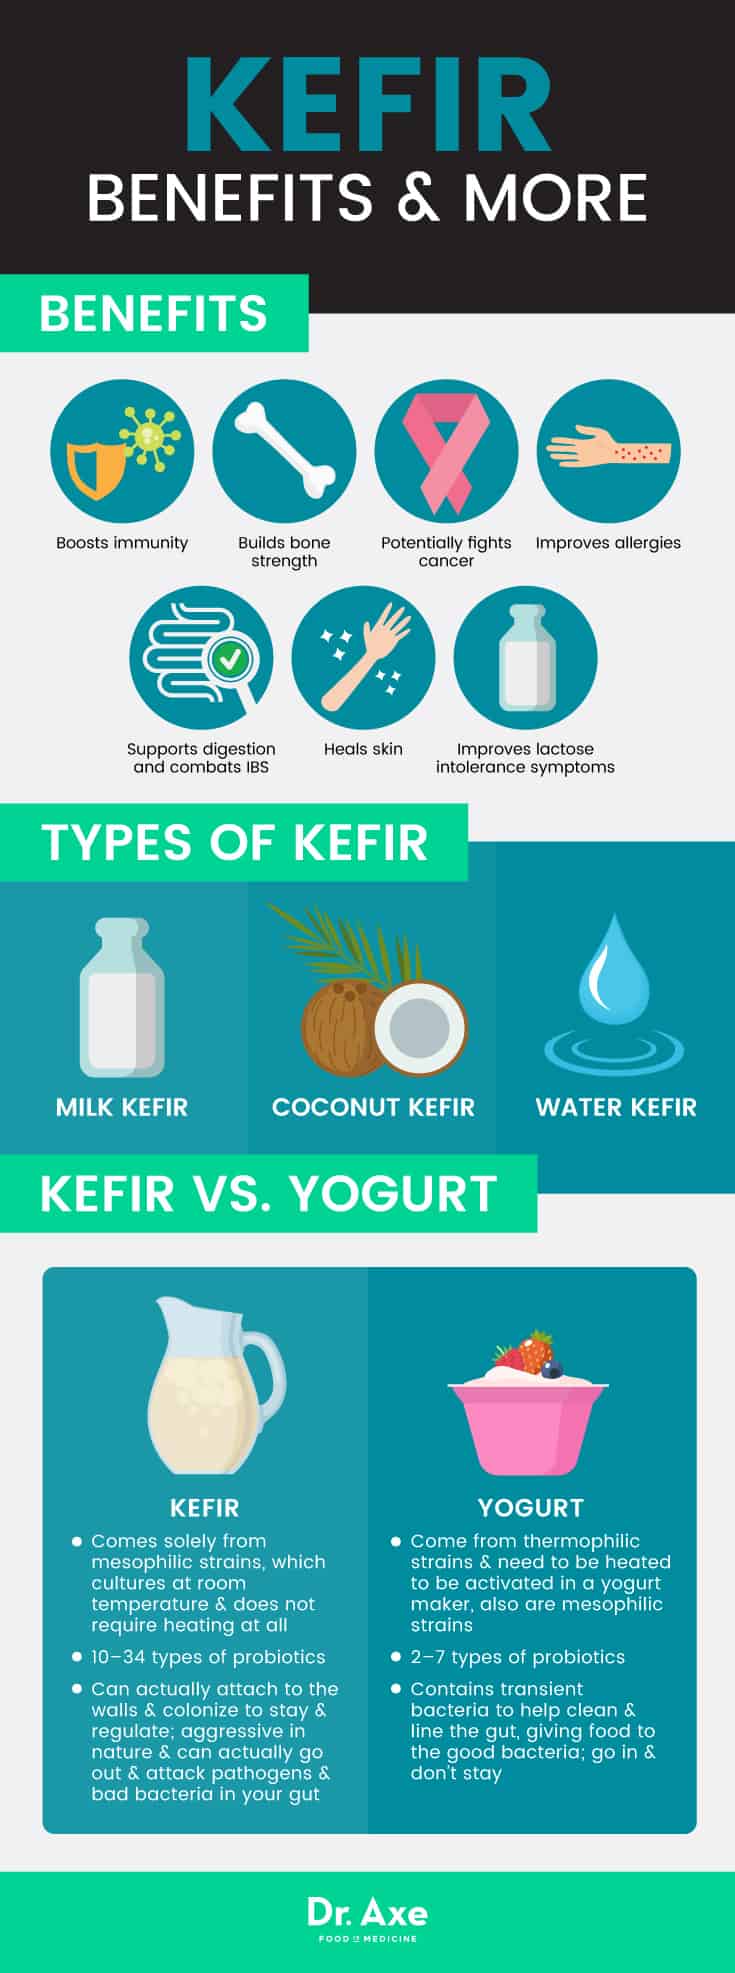 Kefir benefits and more - Dr. Axe